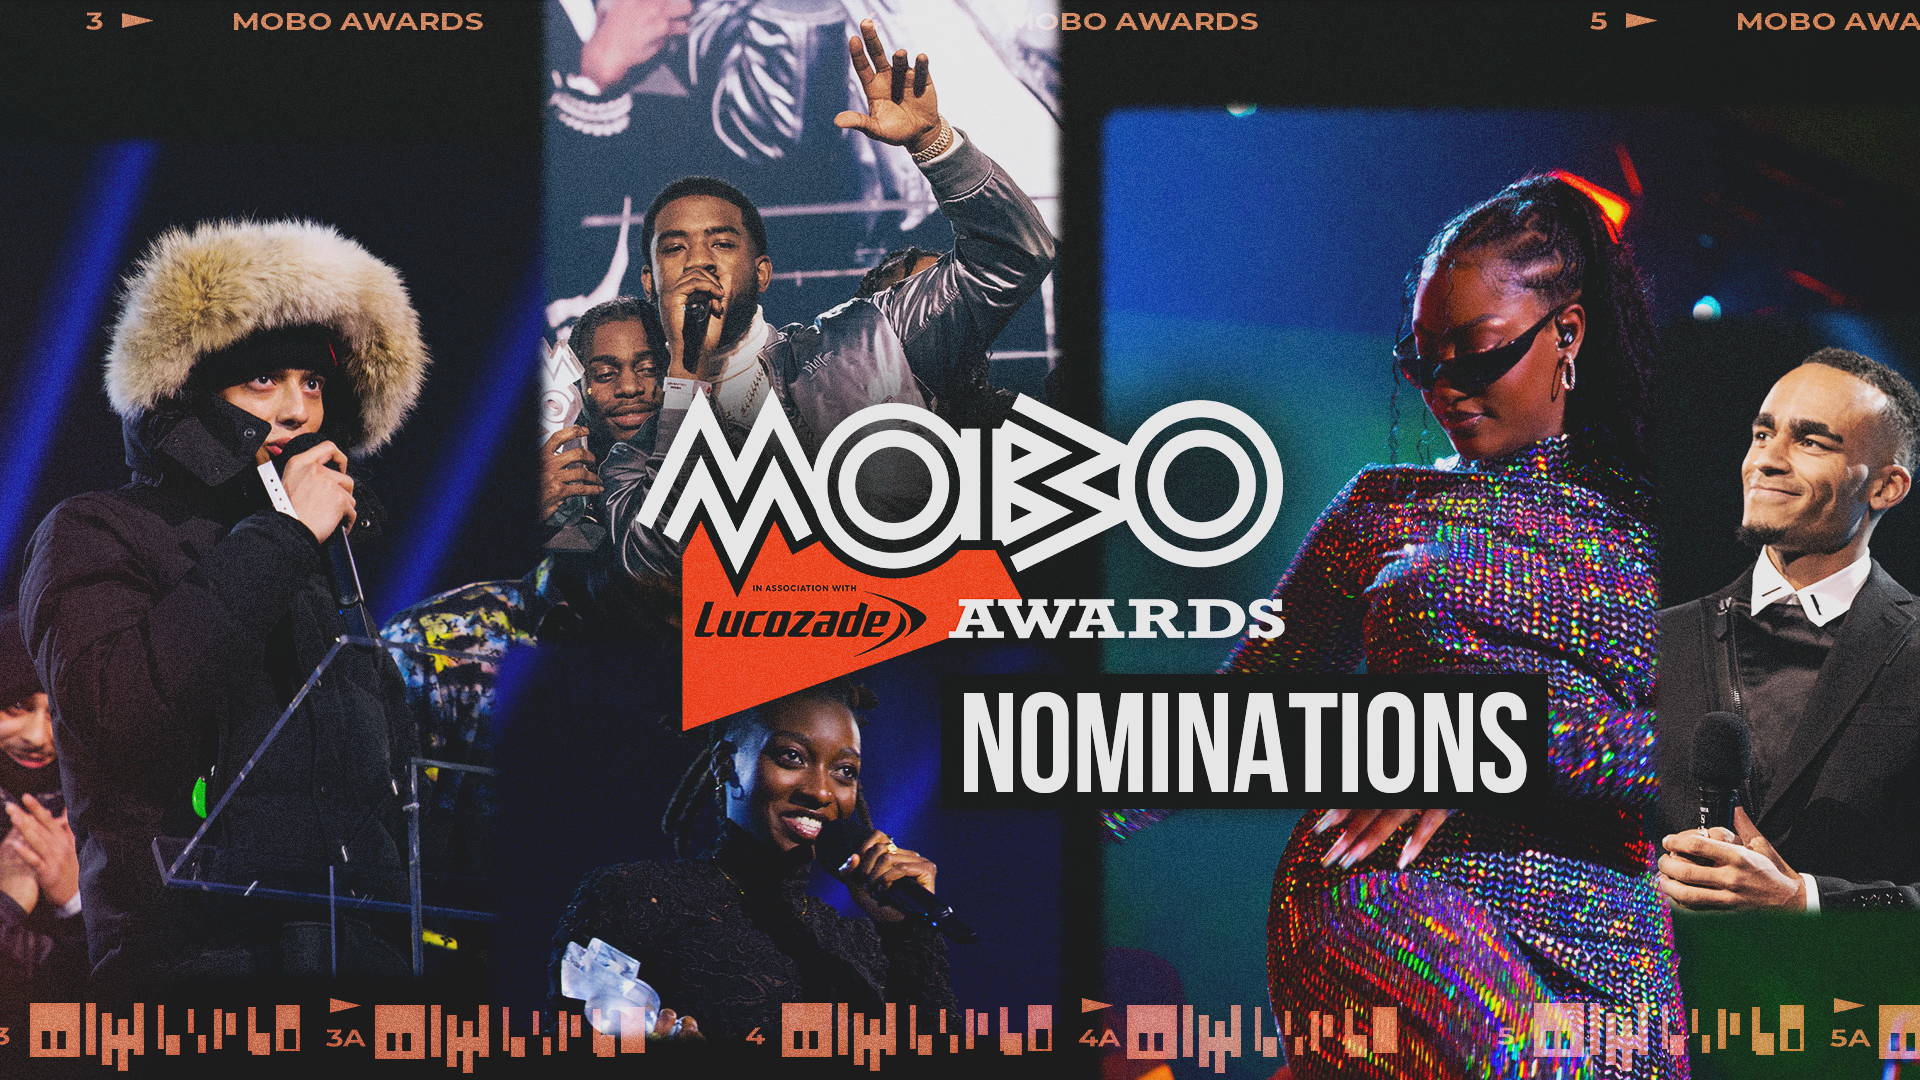 MOBO Awards 2022: The full list of nominations